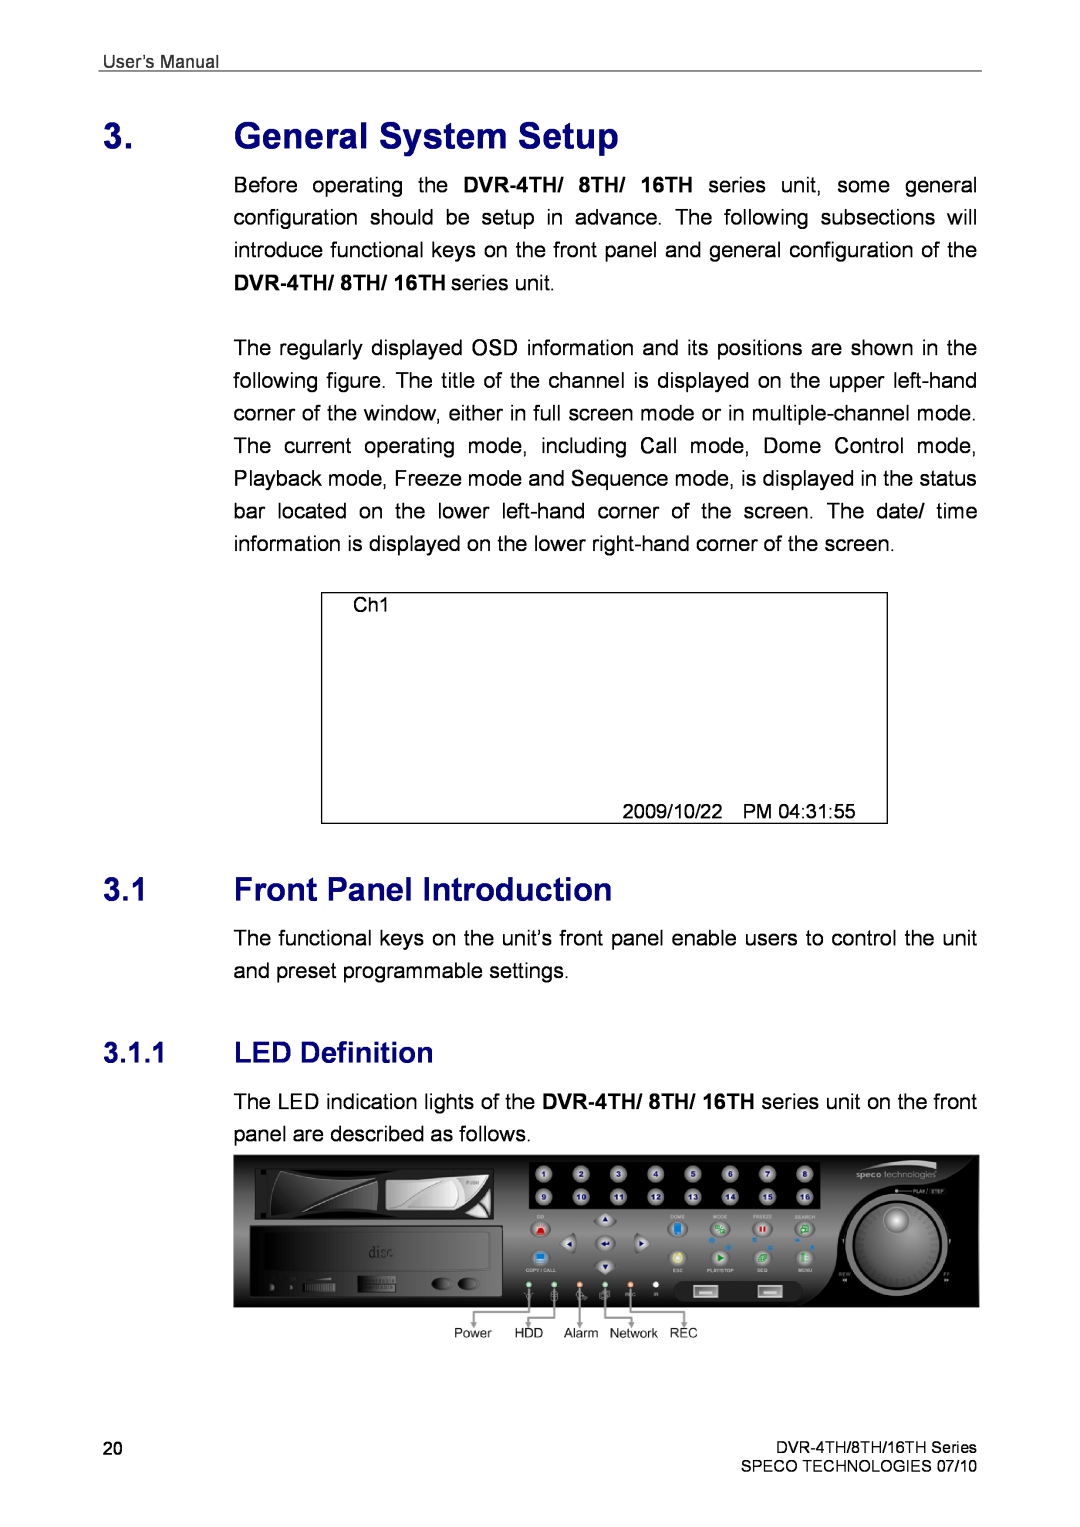 Speco Technologies 8TH, 4TH, 16TH user manual General System Setup, Front Panel Introduction, LED Definition 